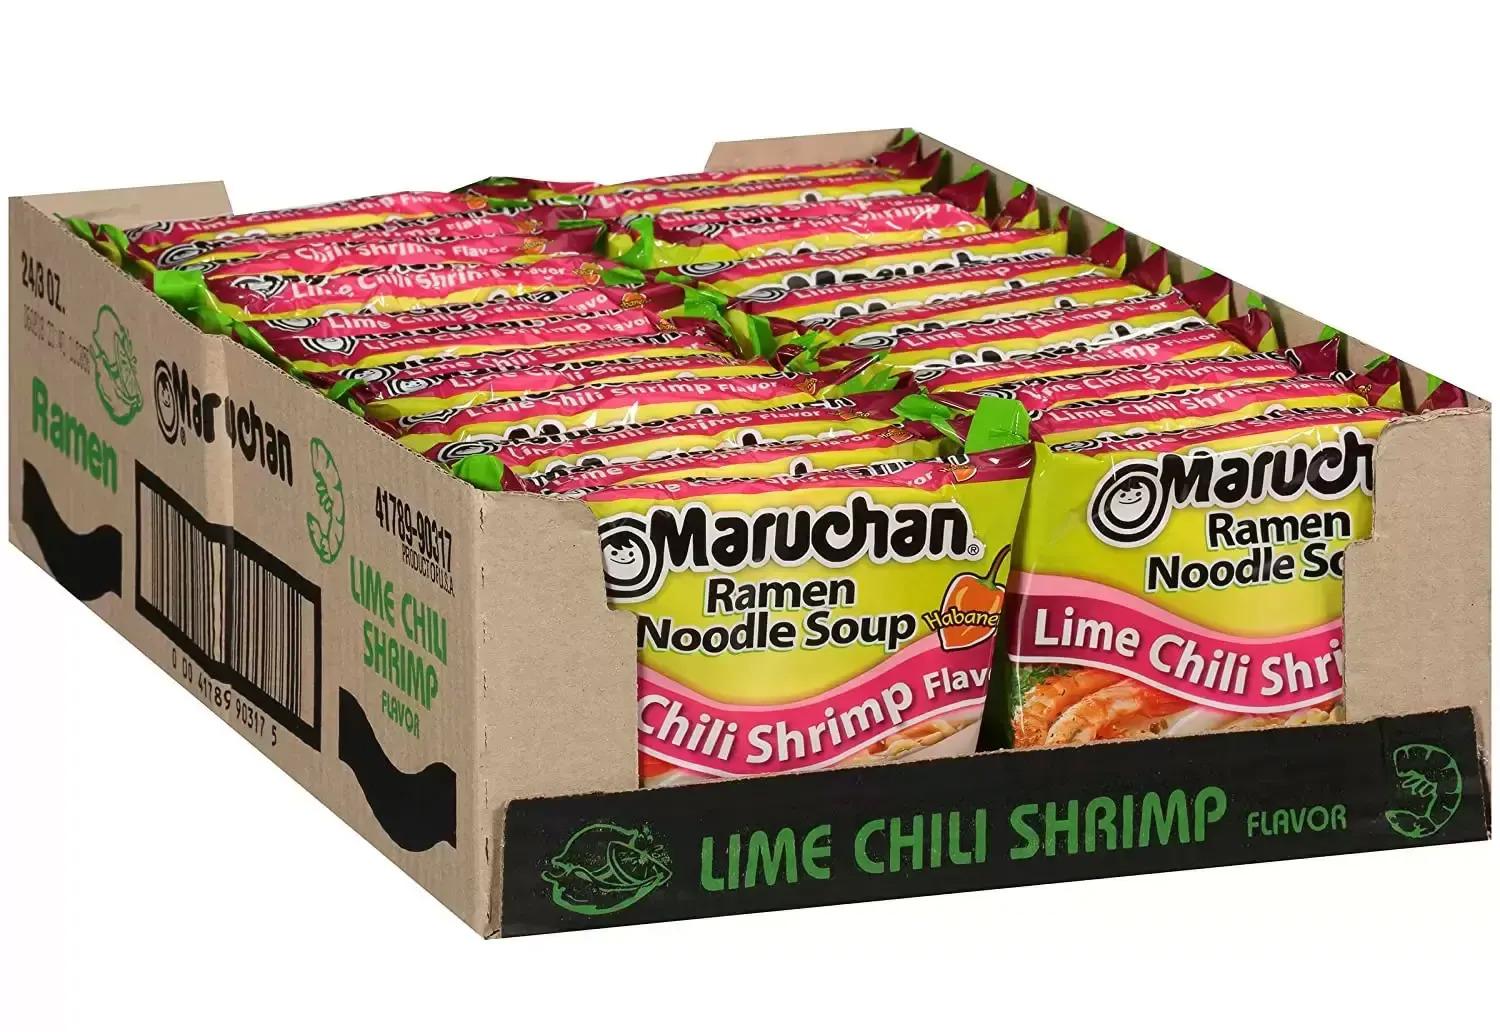 Maruchan Ramen Noodles 24 Pack for $5.76 Shipped